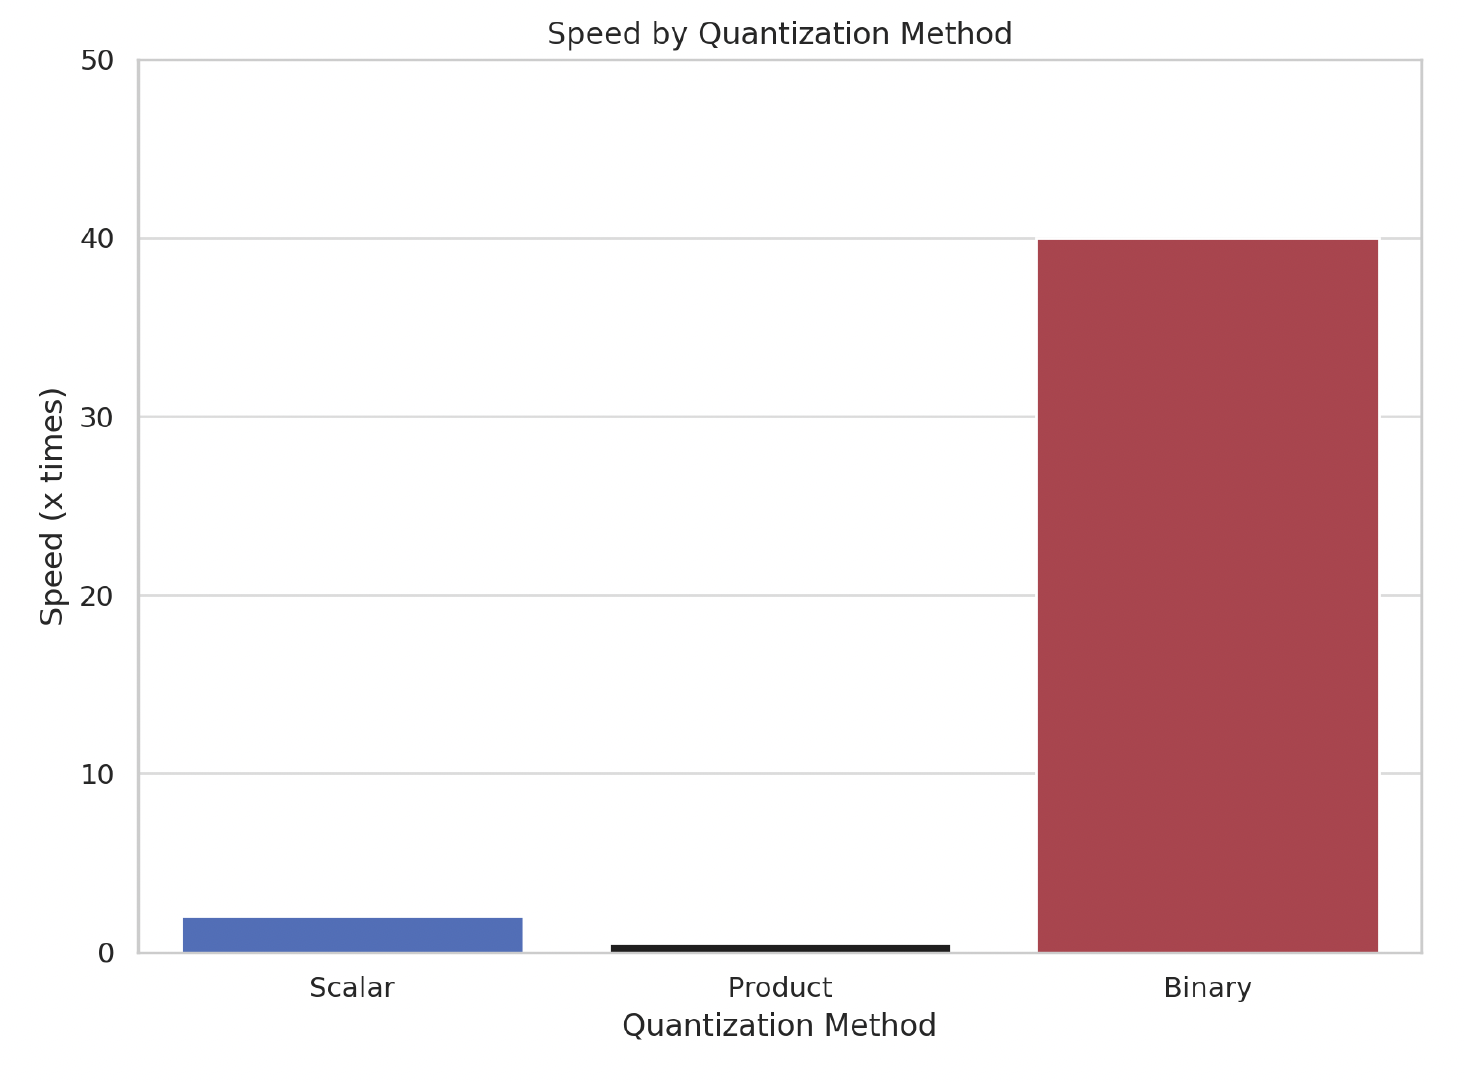 Speed by quantization method